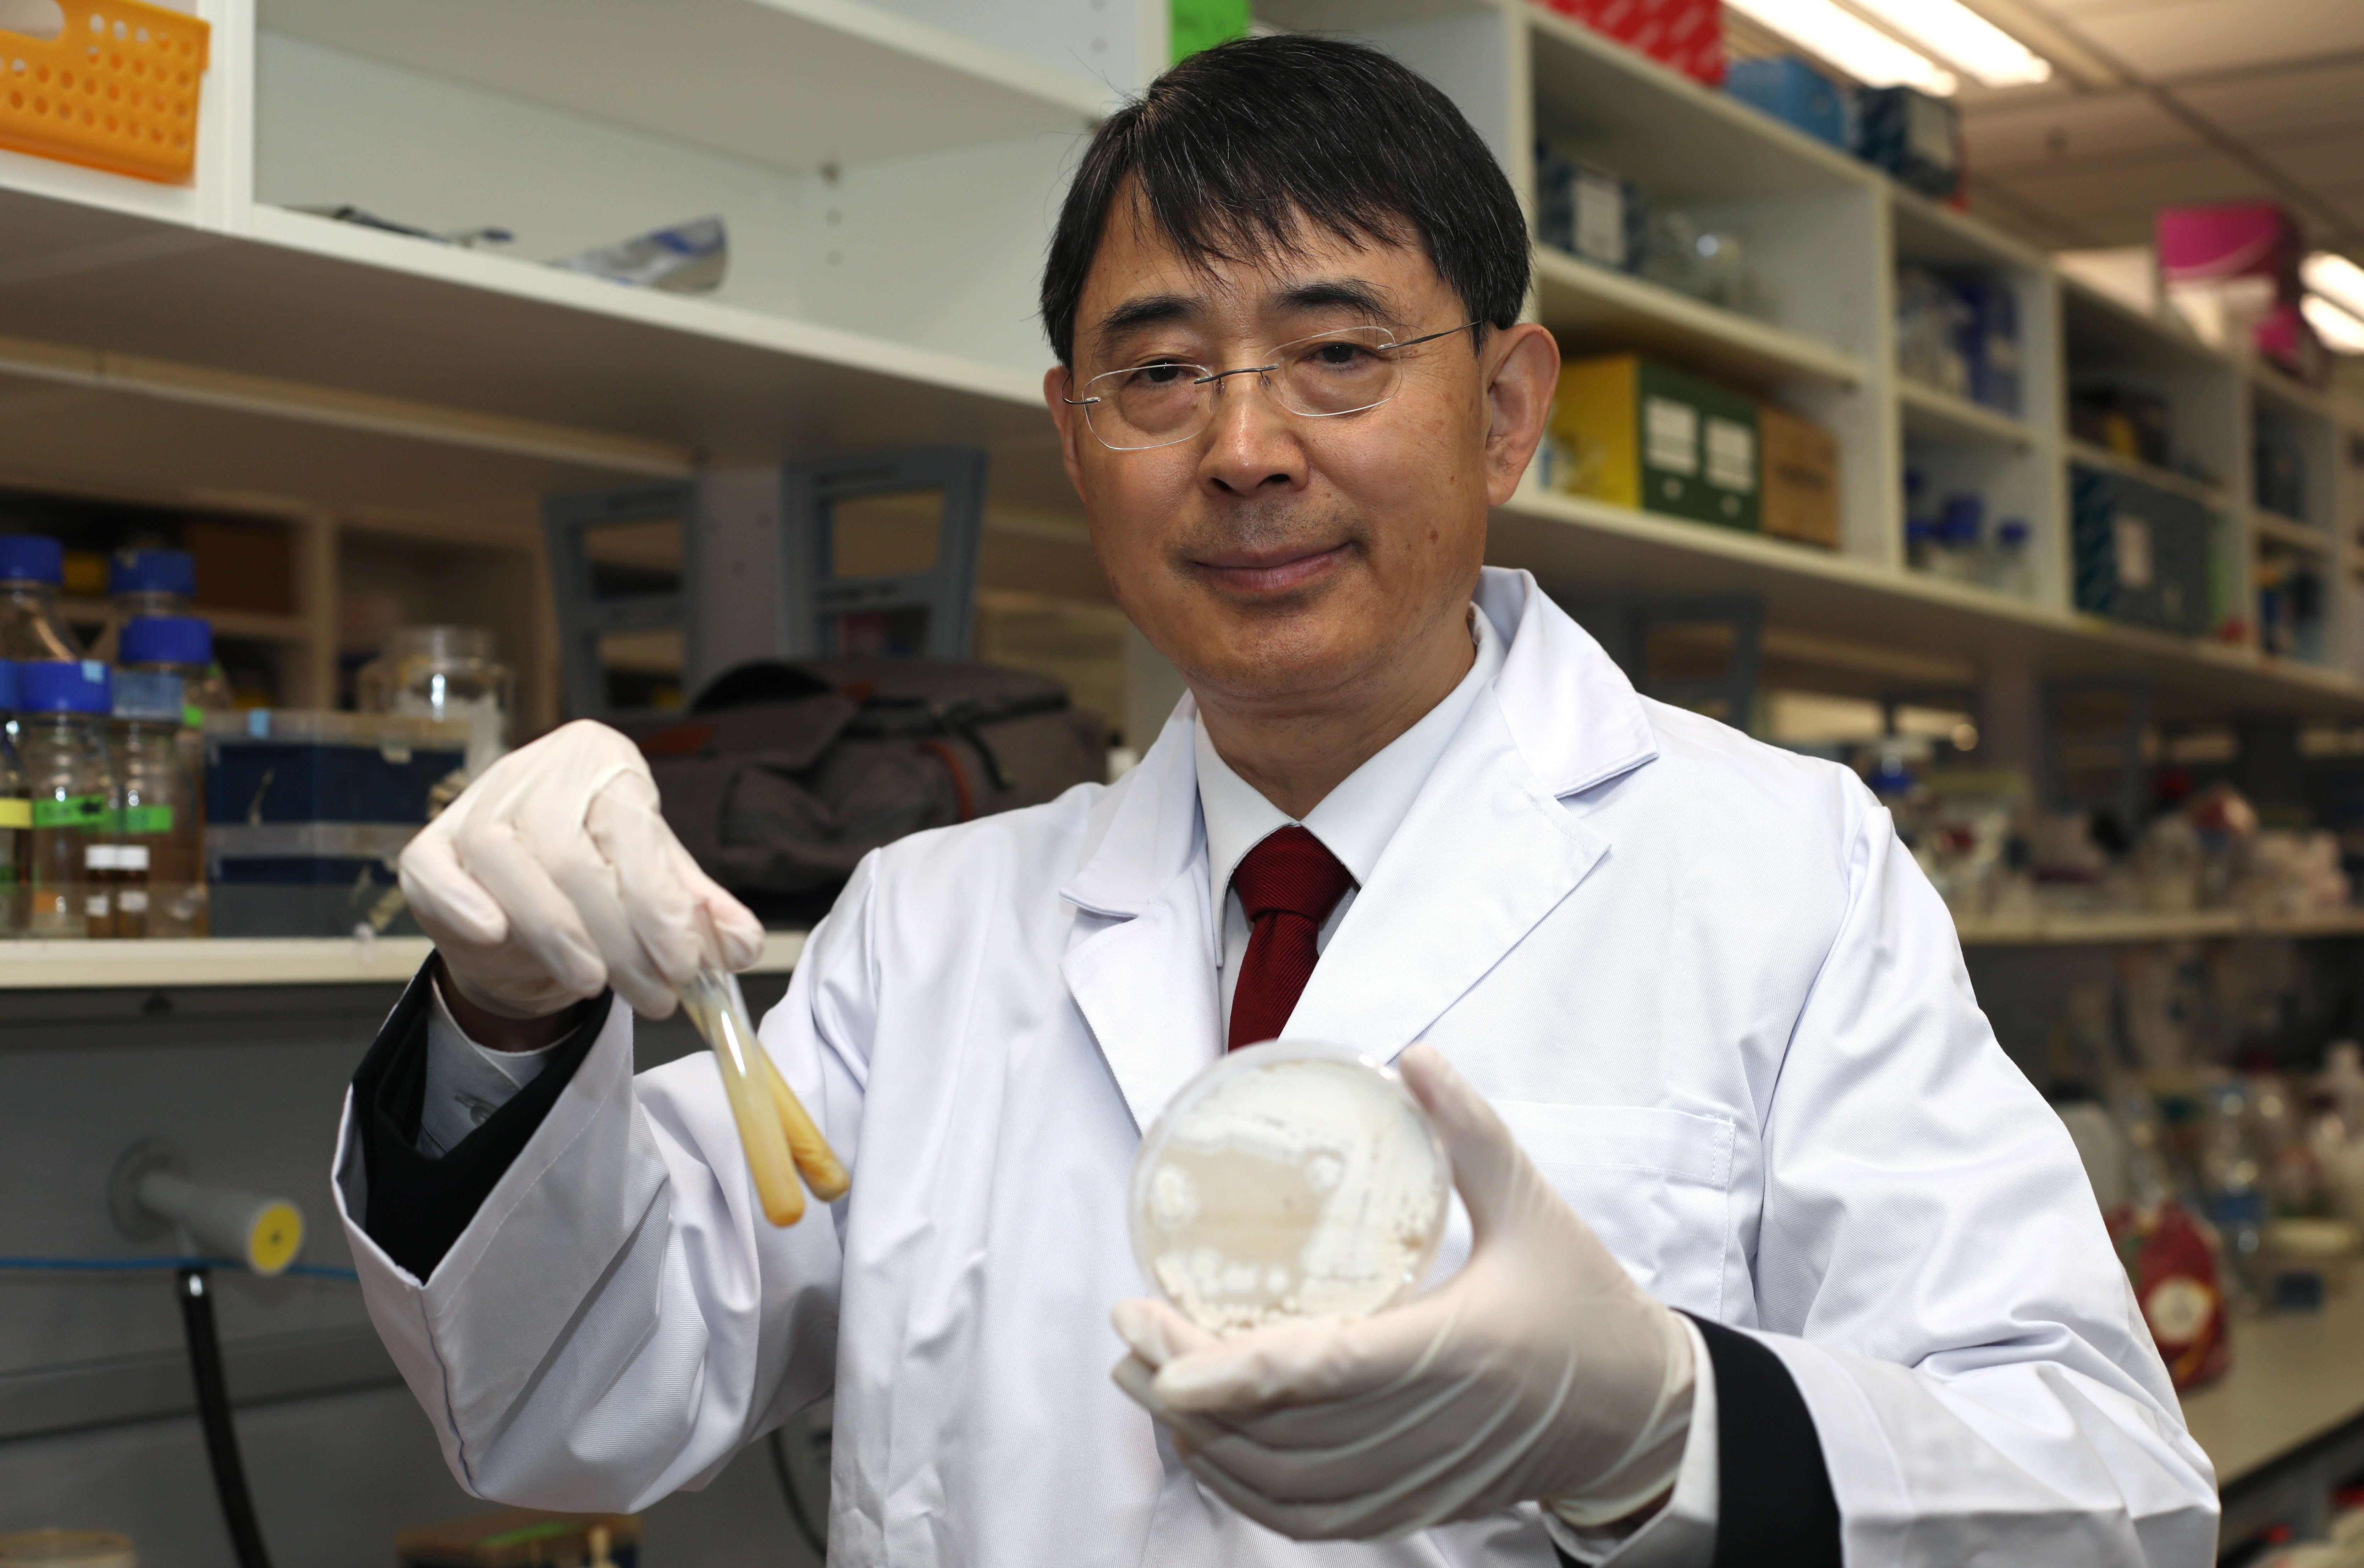 Qian Peiyuan at the University of Science and Technology. Photo: Xiaomei Chen